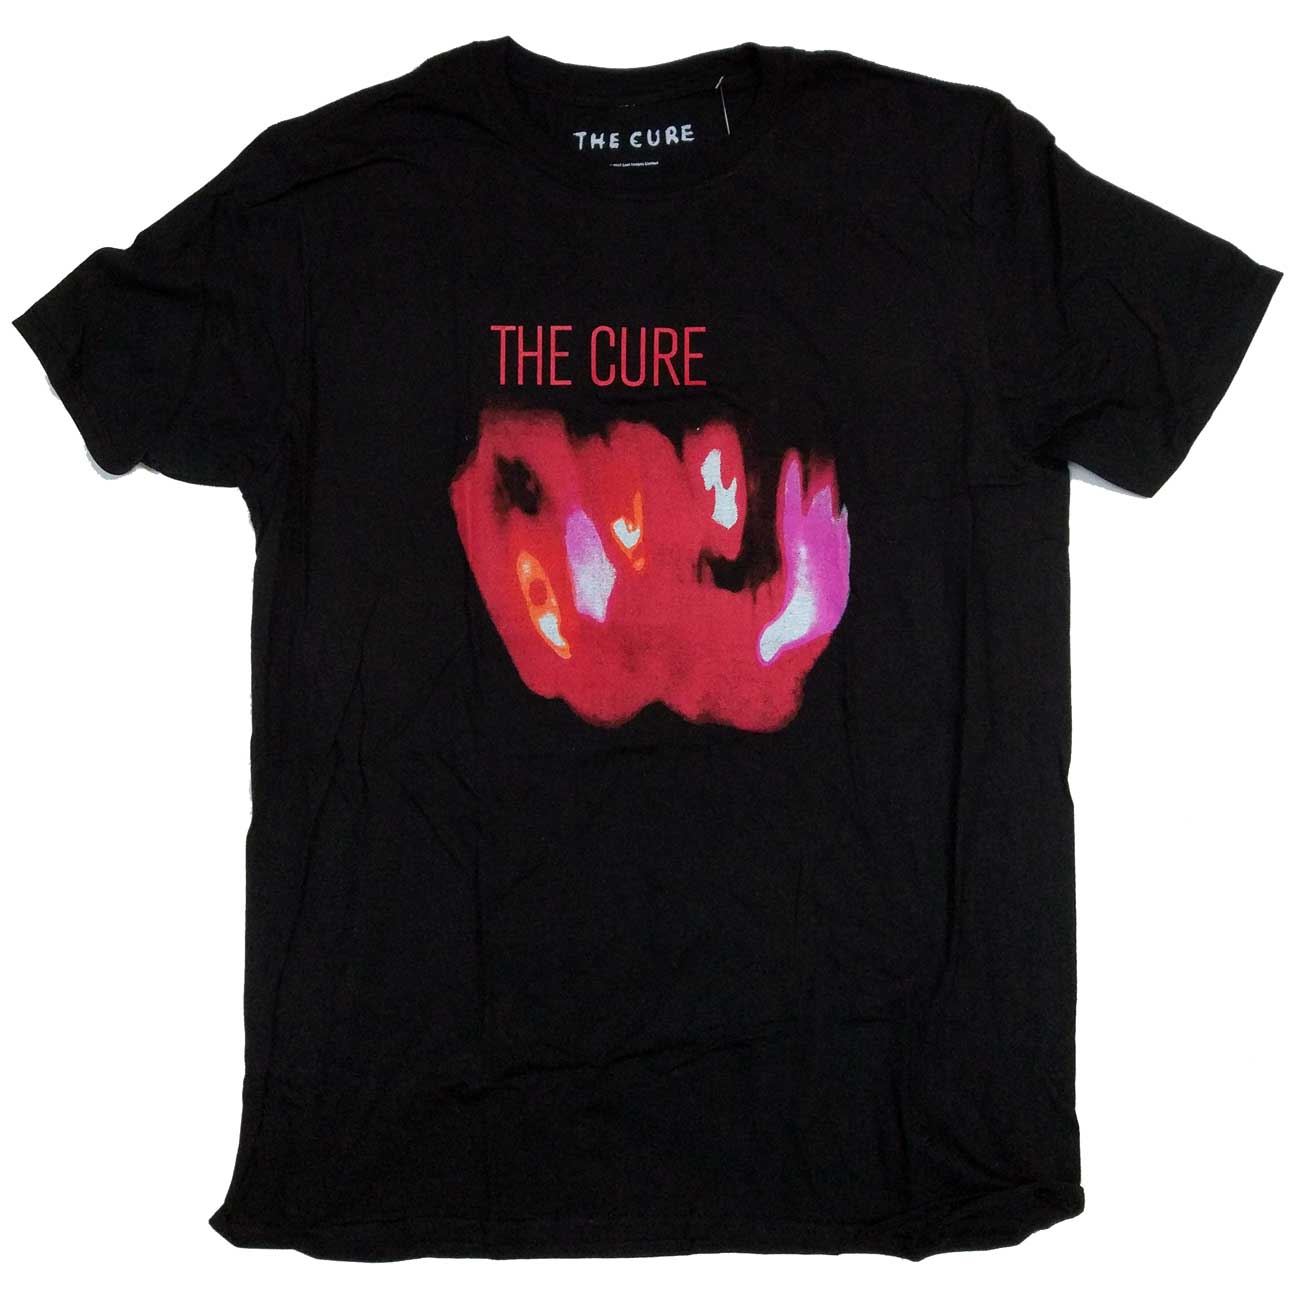 The Cure T Shirt - Pornography 100% Officially Licensed